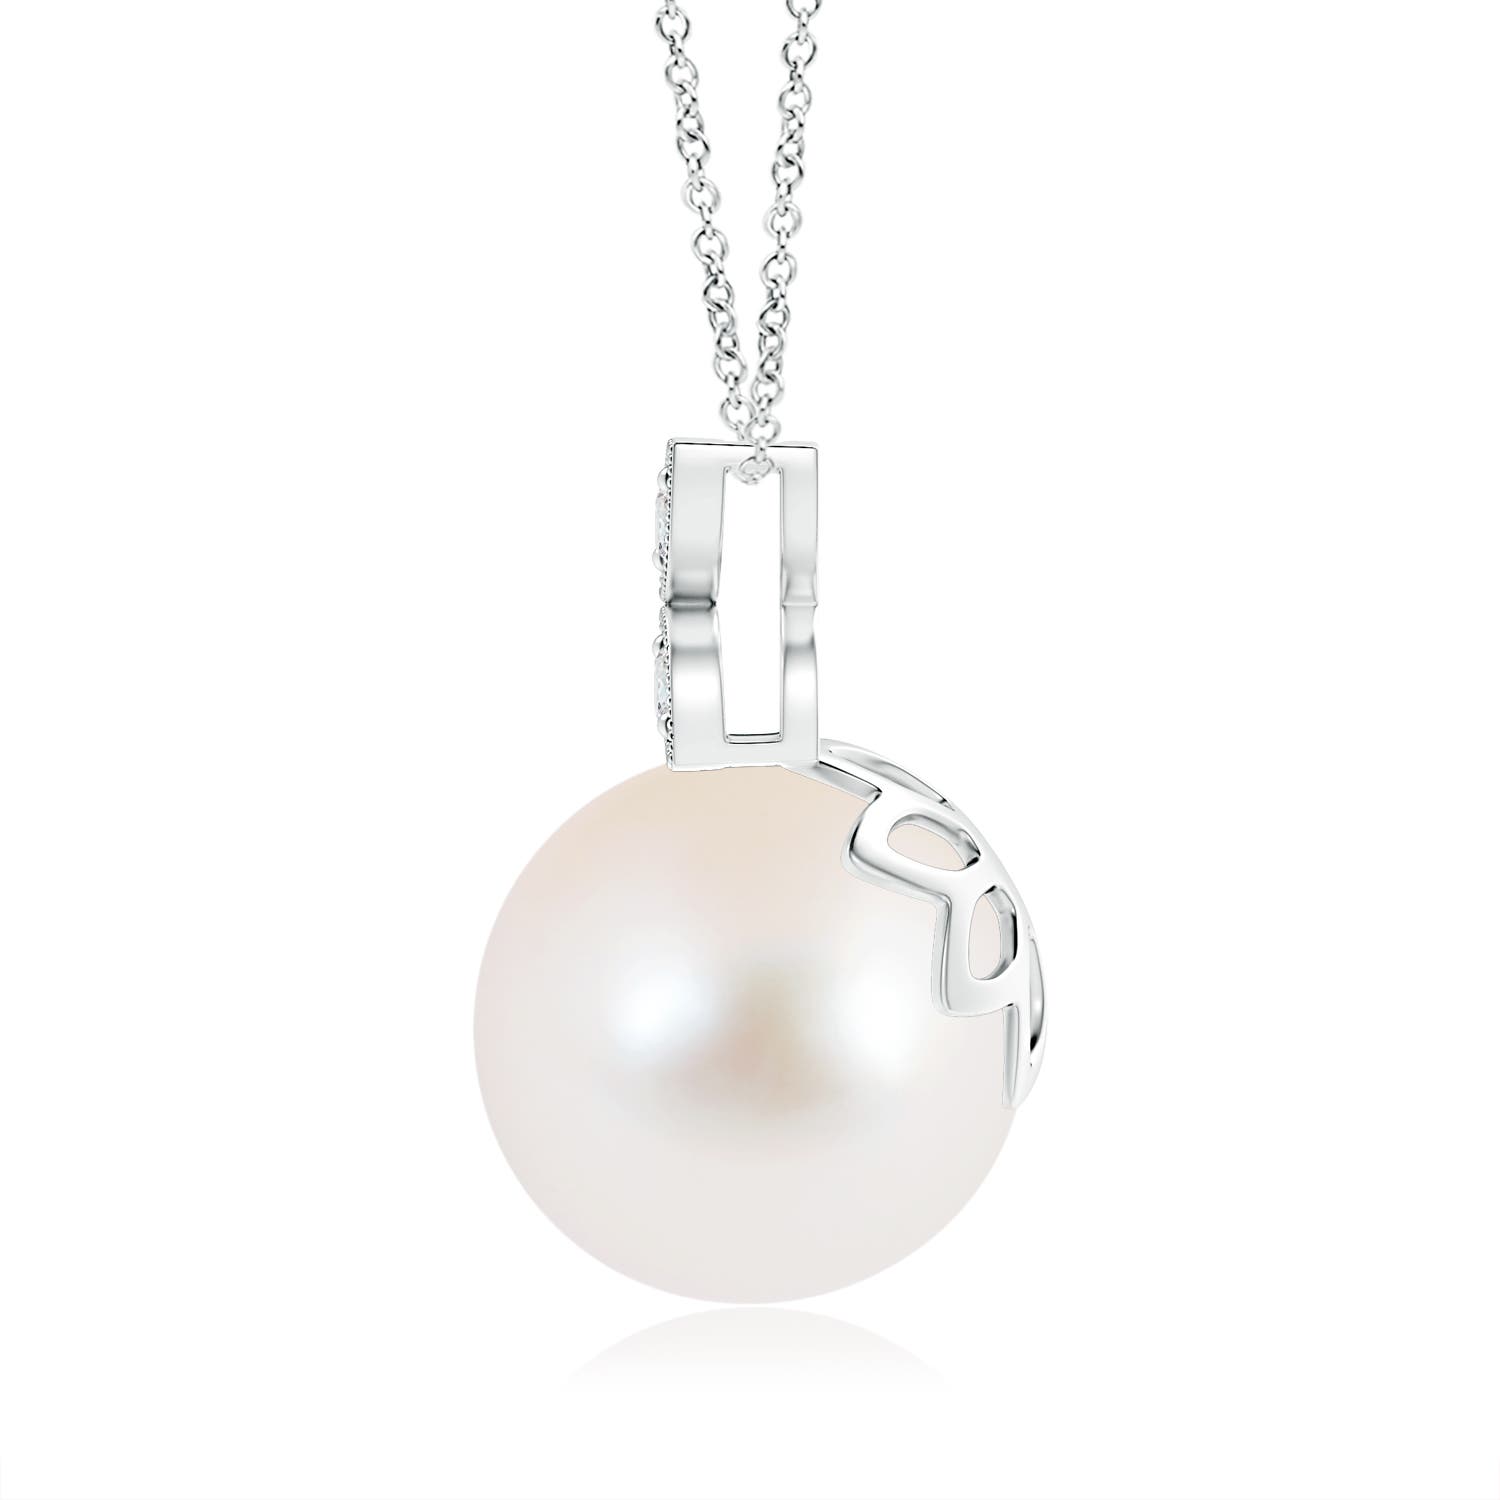 AAA - Freshwater Cultured Pearl / 7.3 CT / 14 KT White Gold